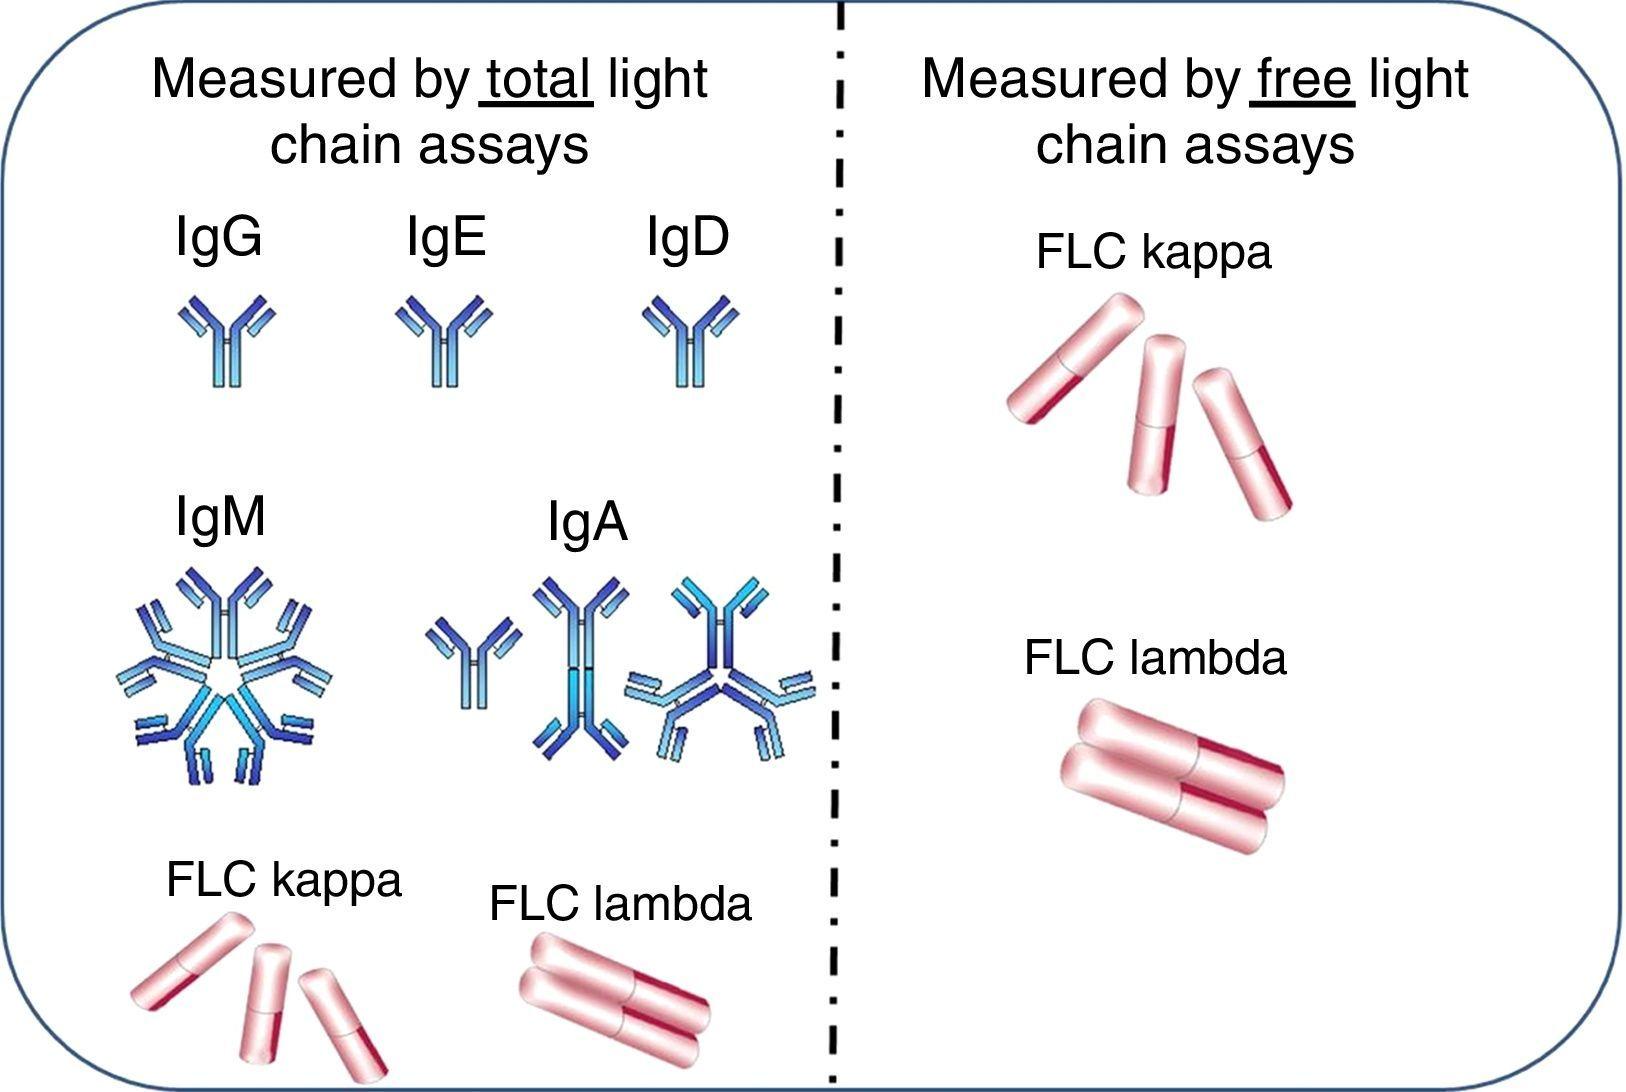 Serum free light chain assays not light chain assays are the of care to assess Monoclonal Gammopathies | Hematology, Transfusion and Cell Therapy